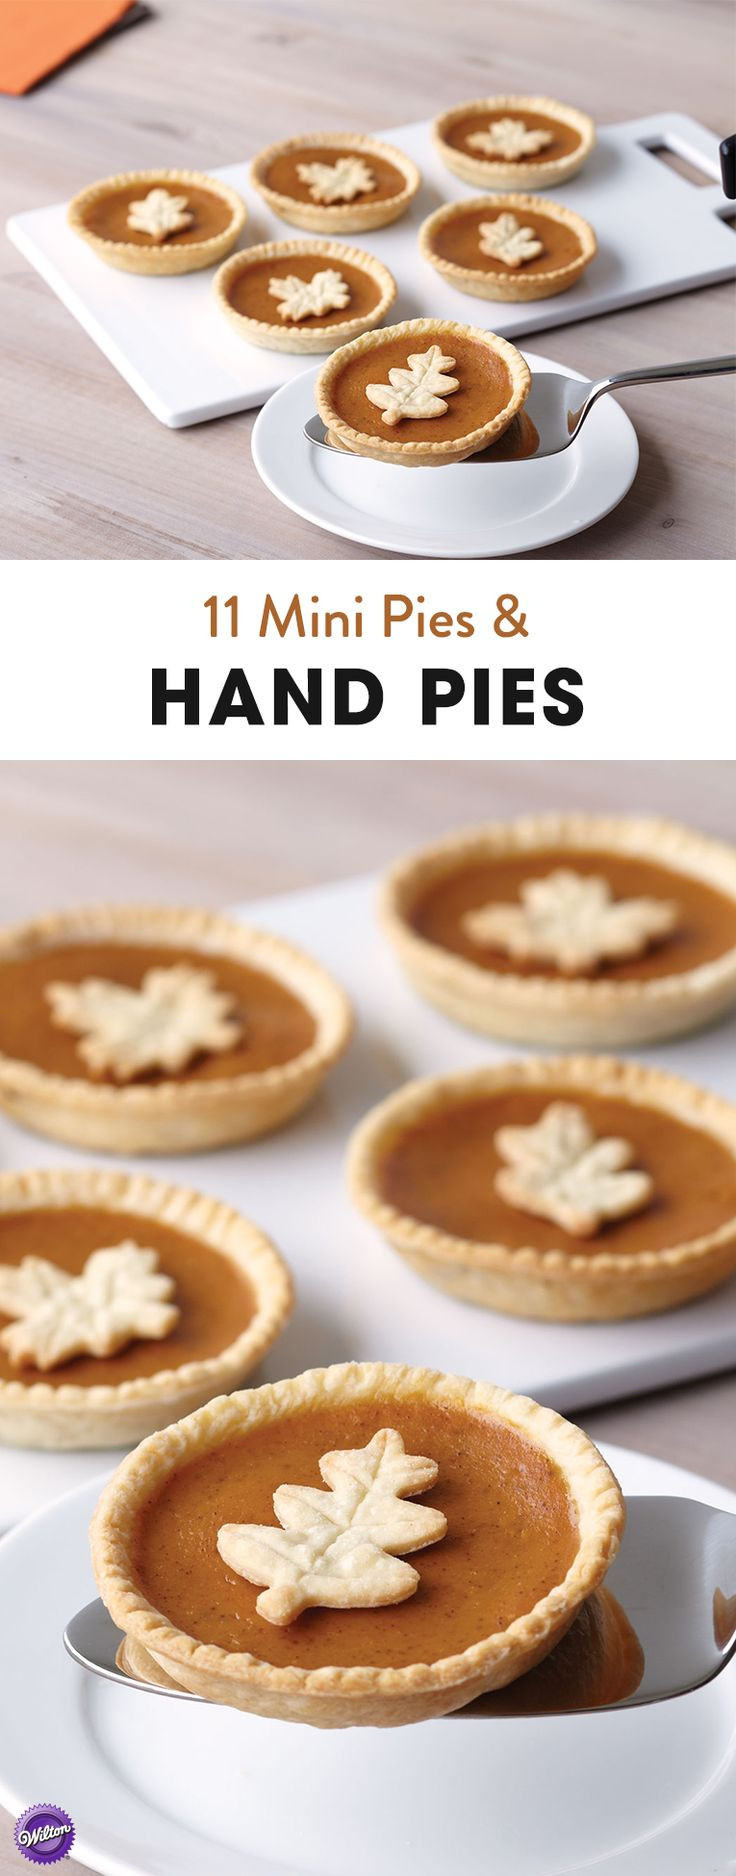 Mini Pies For Thanksgiving
 25 best ideas about Mini Pies on Pinterest